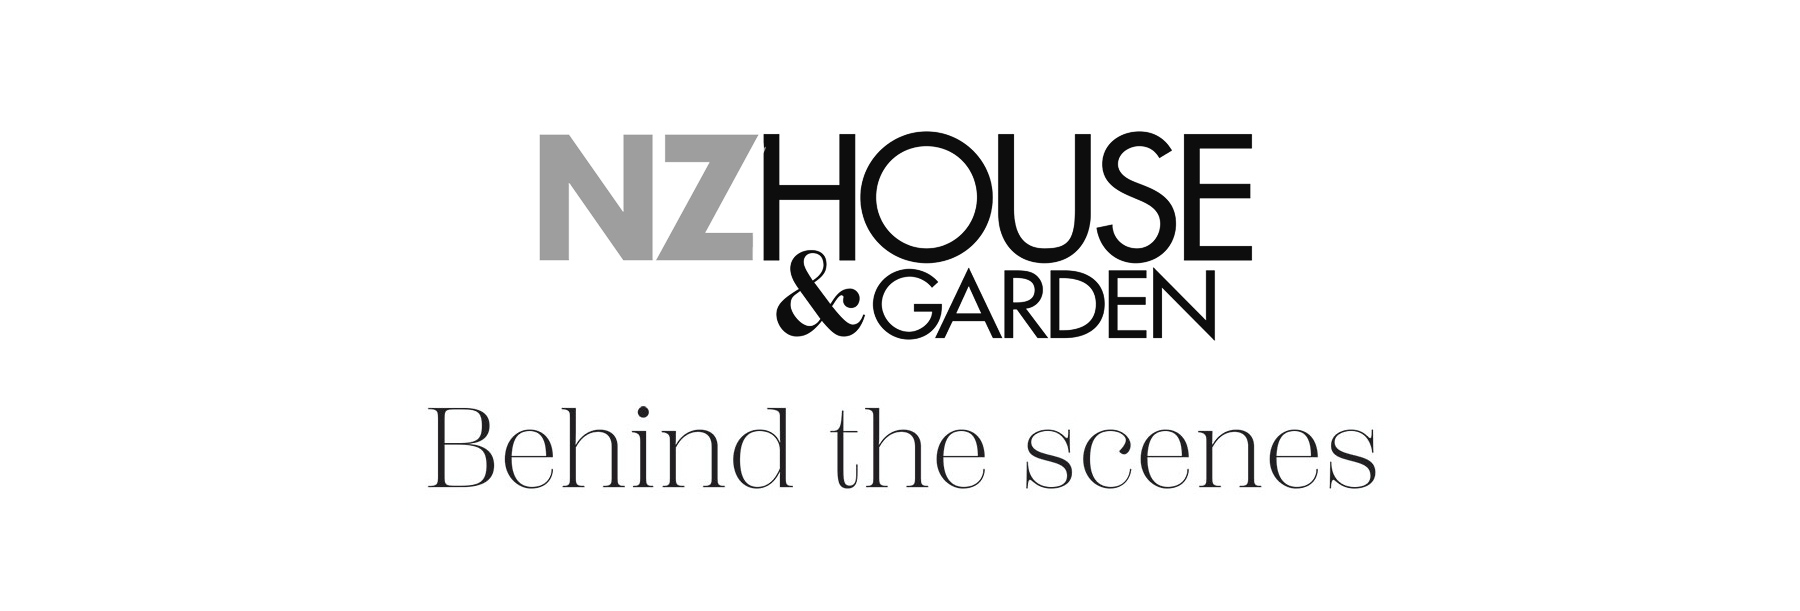 New Zealand House and Garden・Behind The Scenes・Manja Wachsmuth